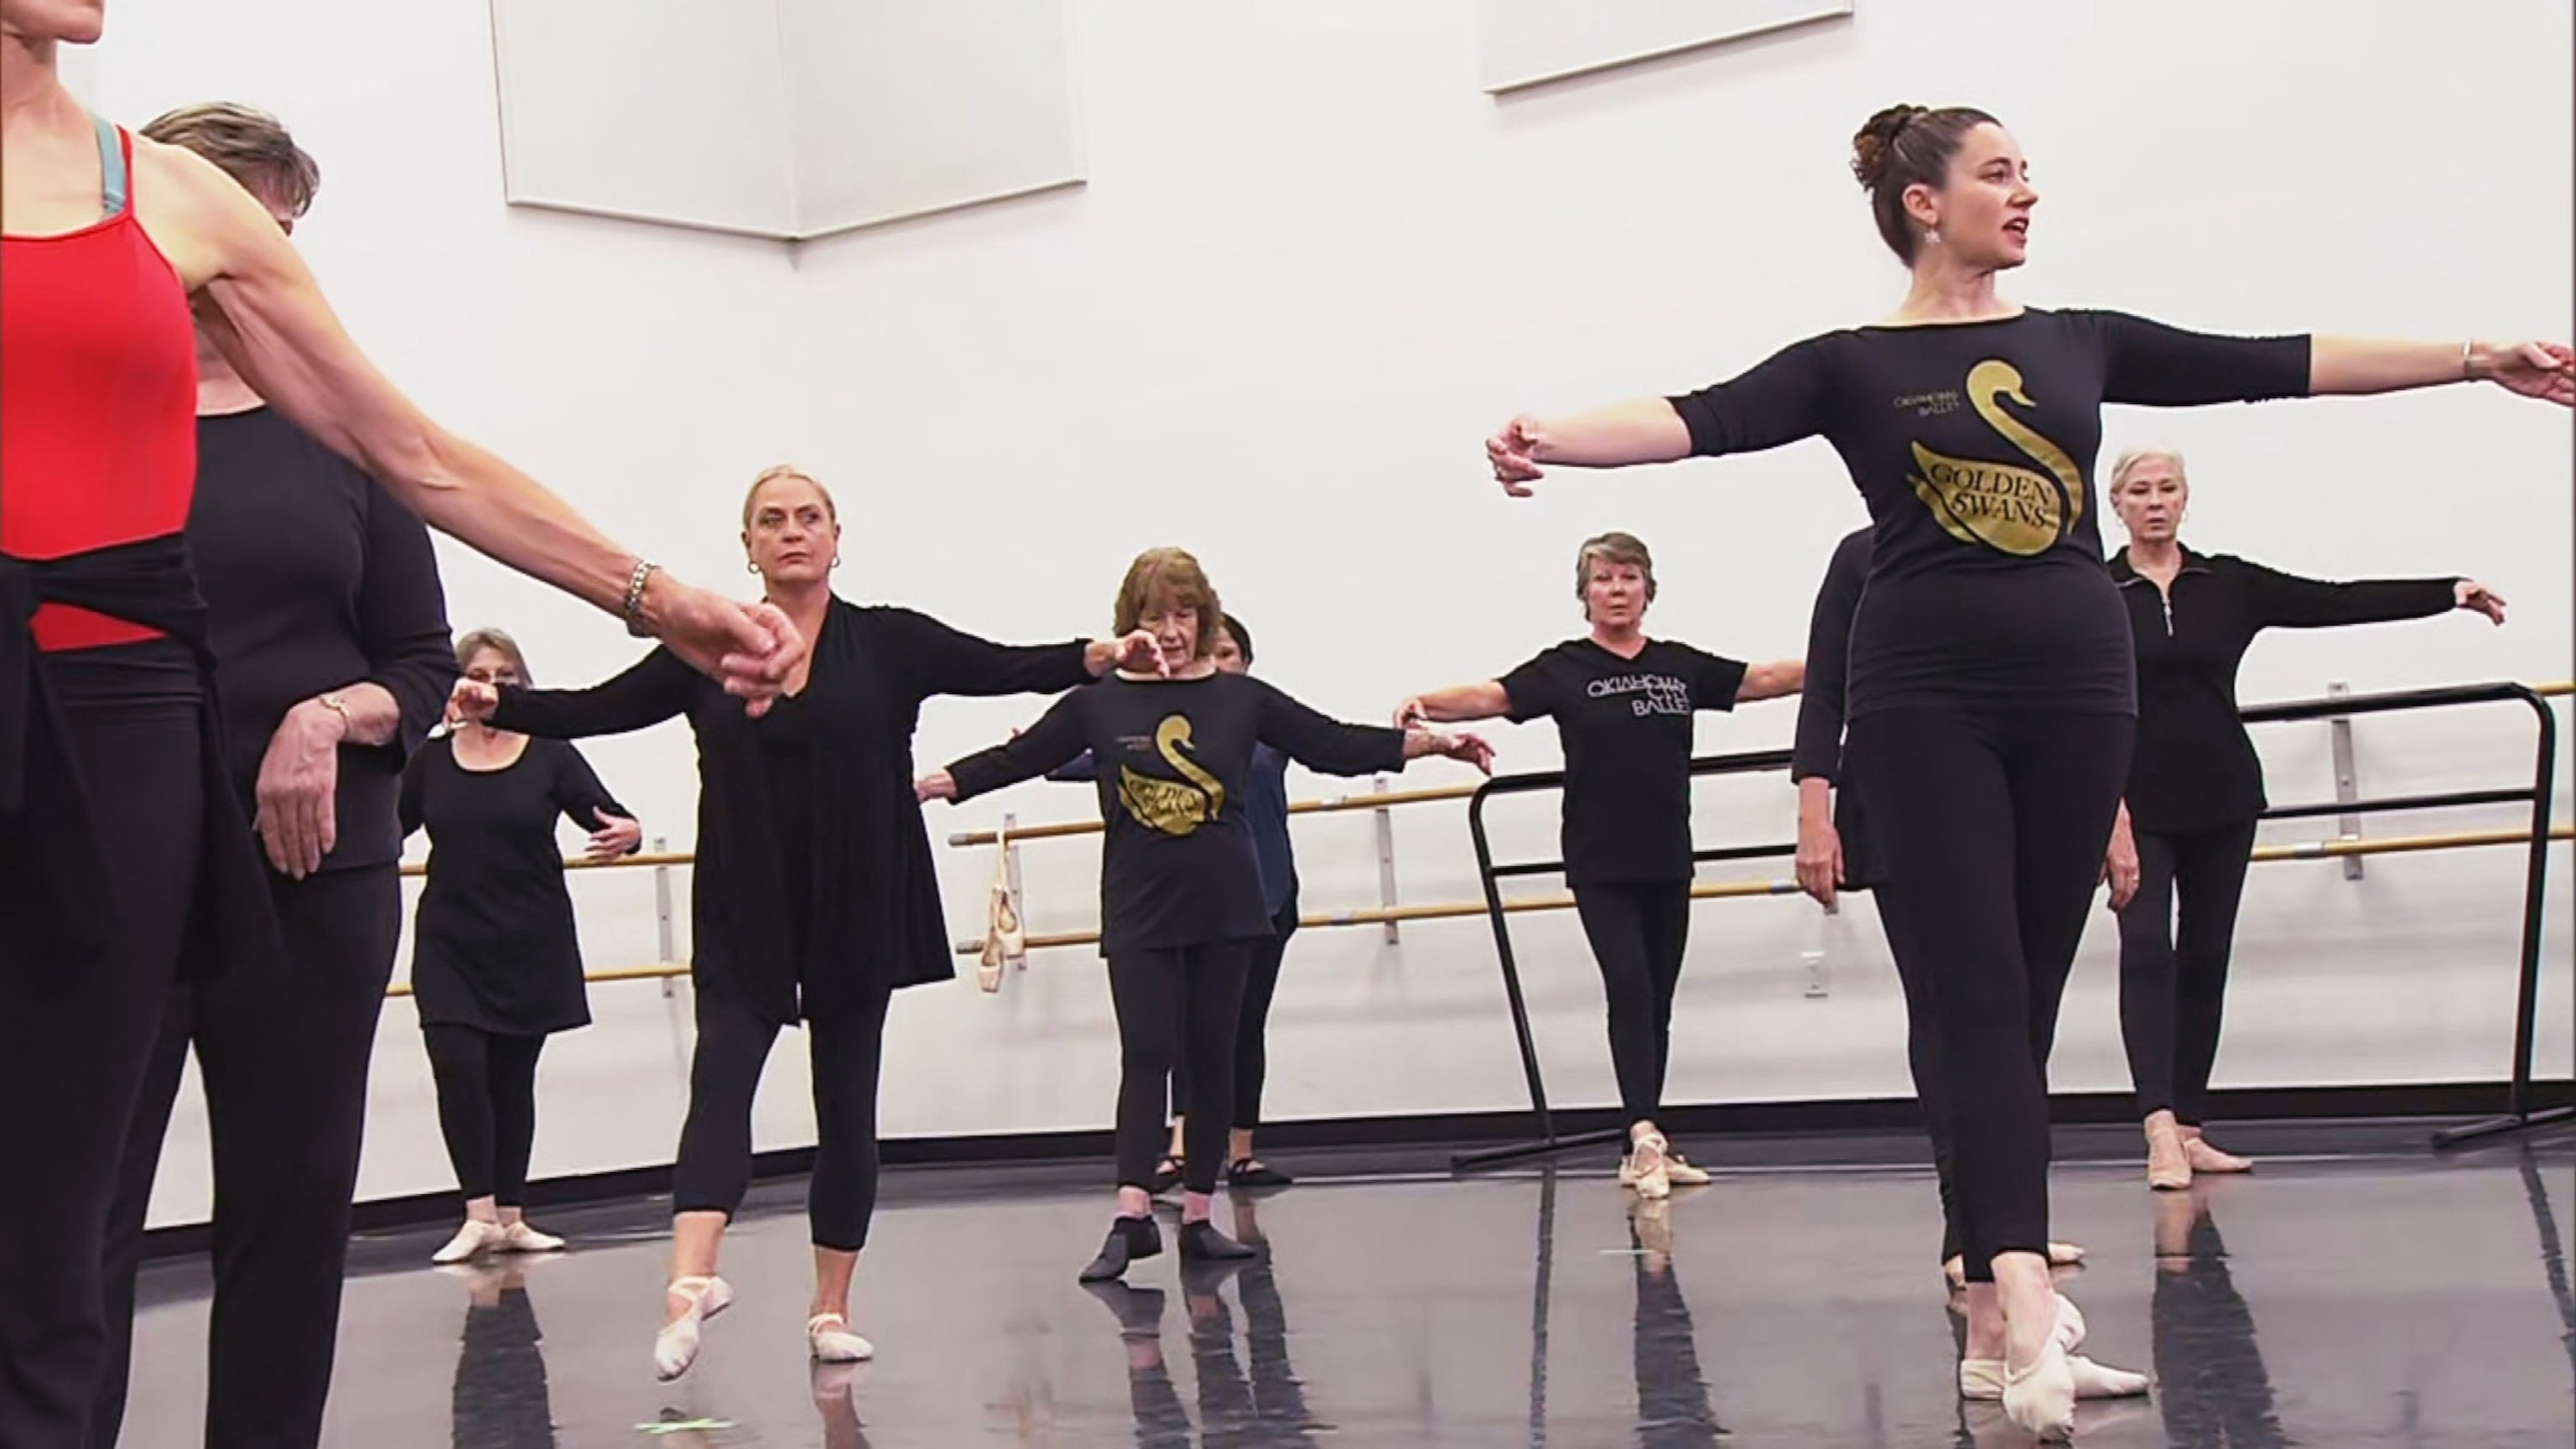 PHOTO: Participants of the Oklahoma City Ballet's "Golden Swans" program take part in a routine.